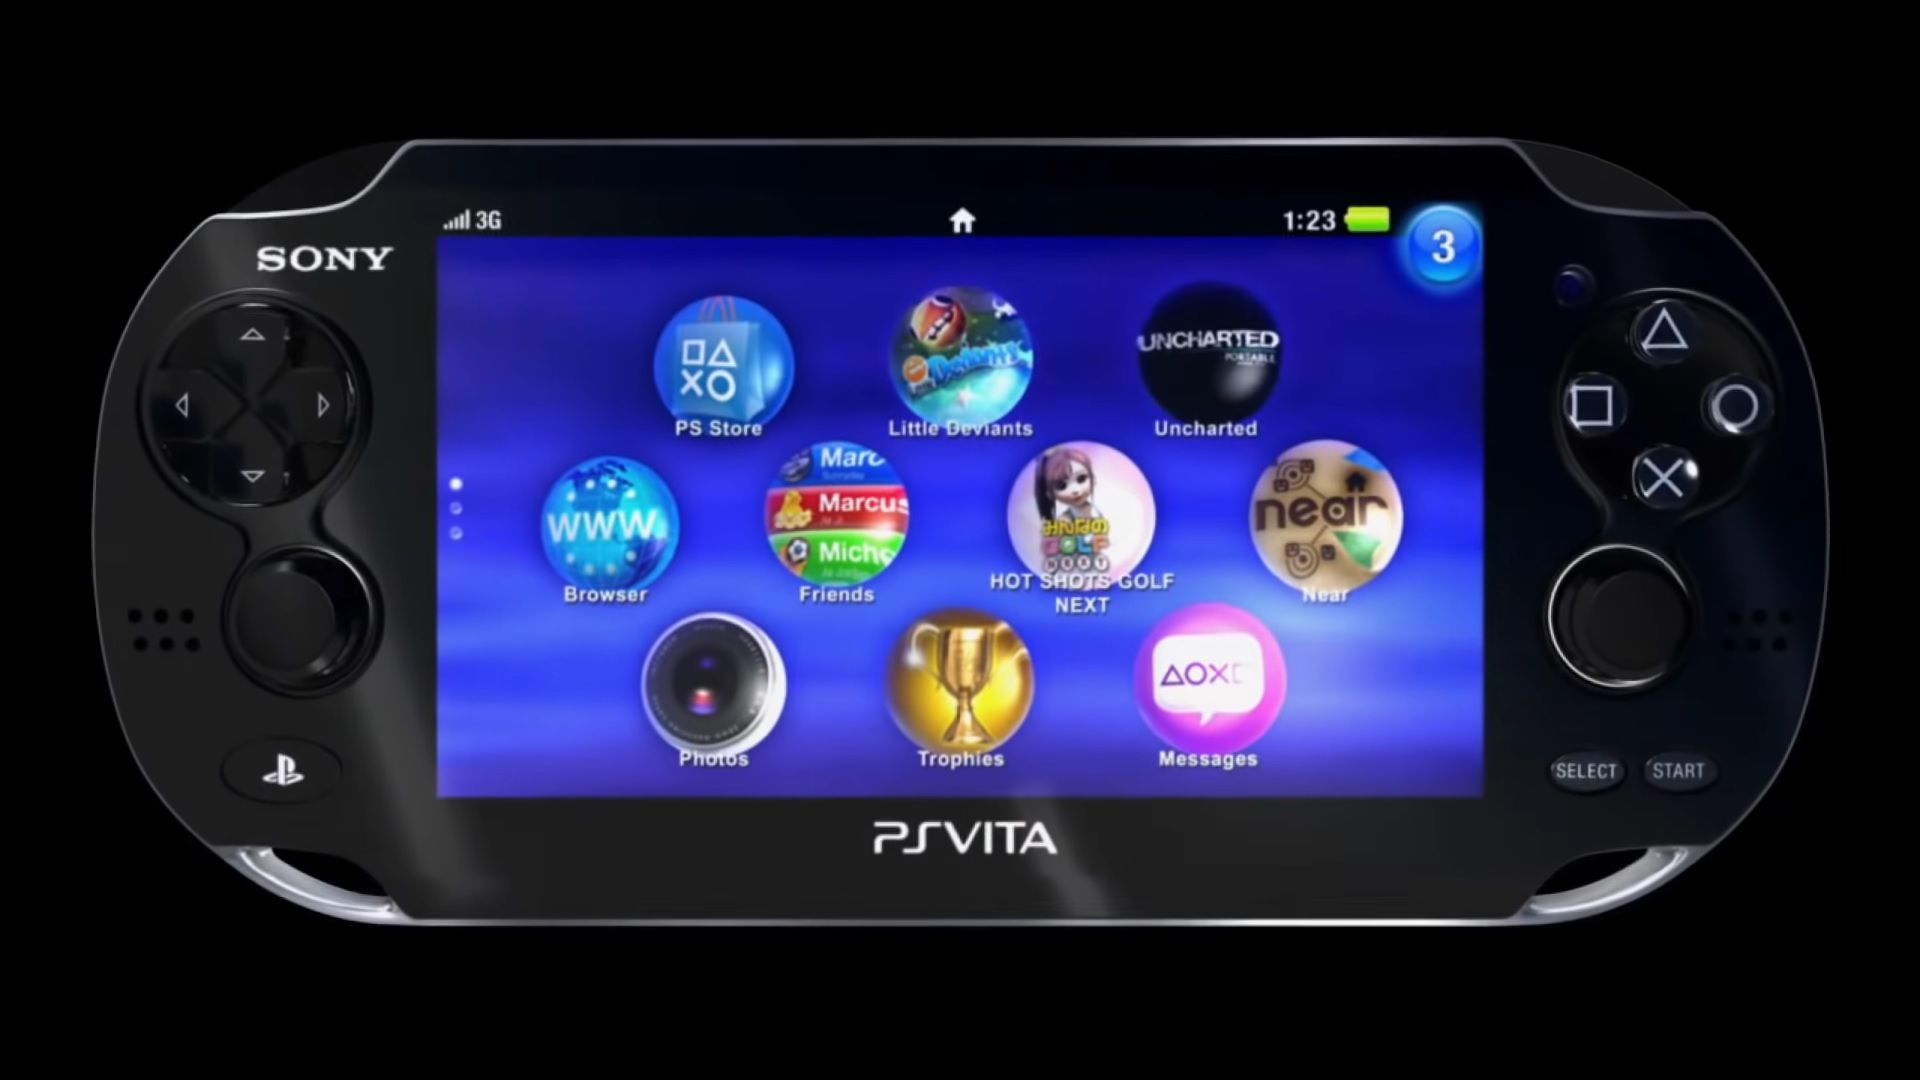 The PlayStation Vita: History, Launch, and Ultimate Failure